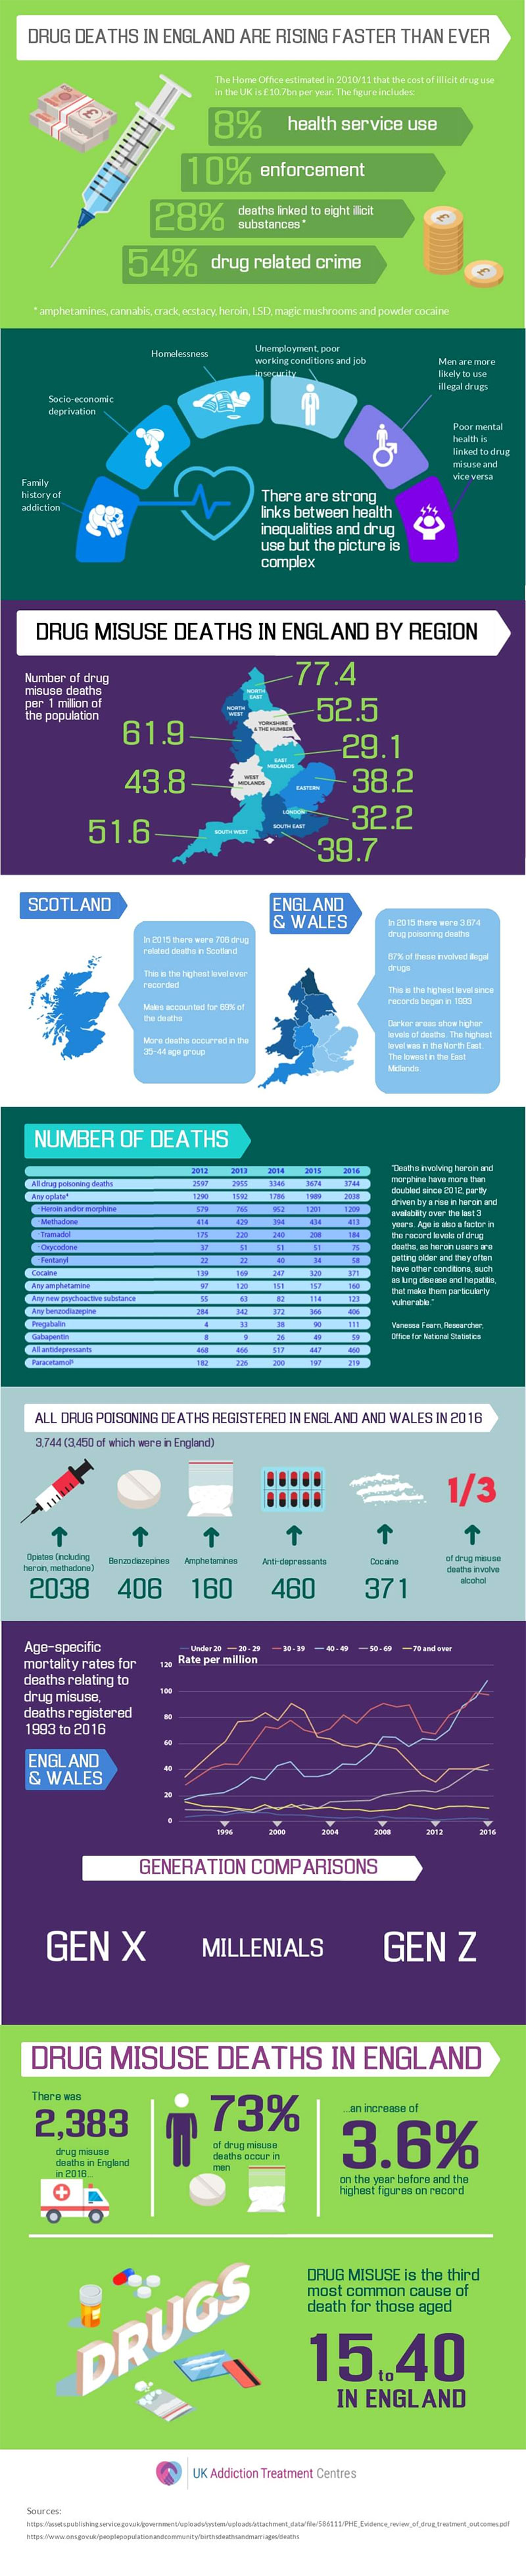 Drug Deaths in the UK - infographic